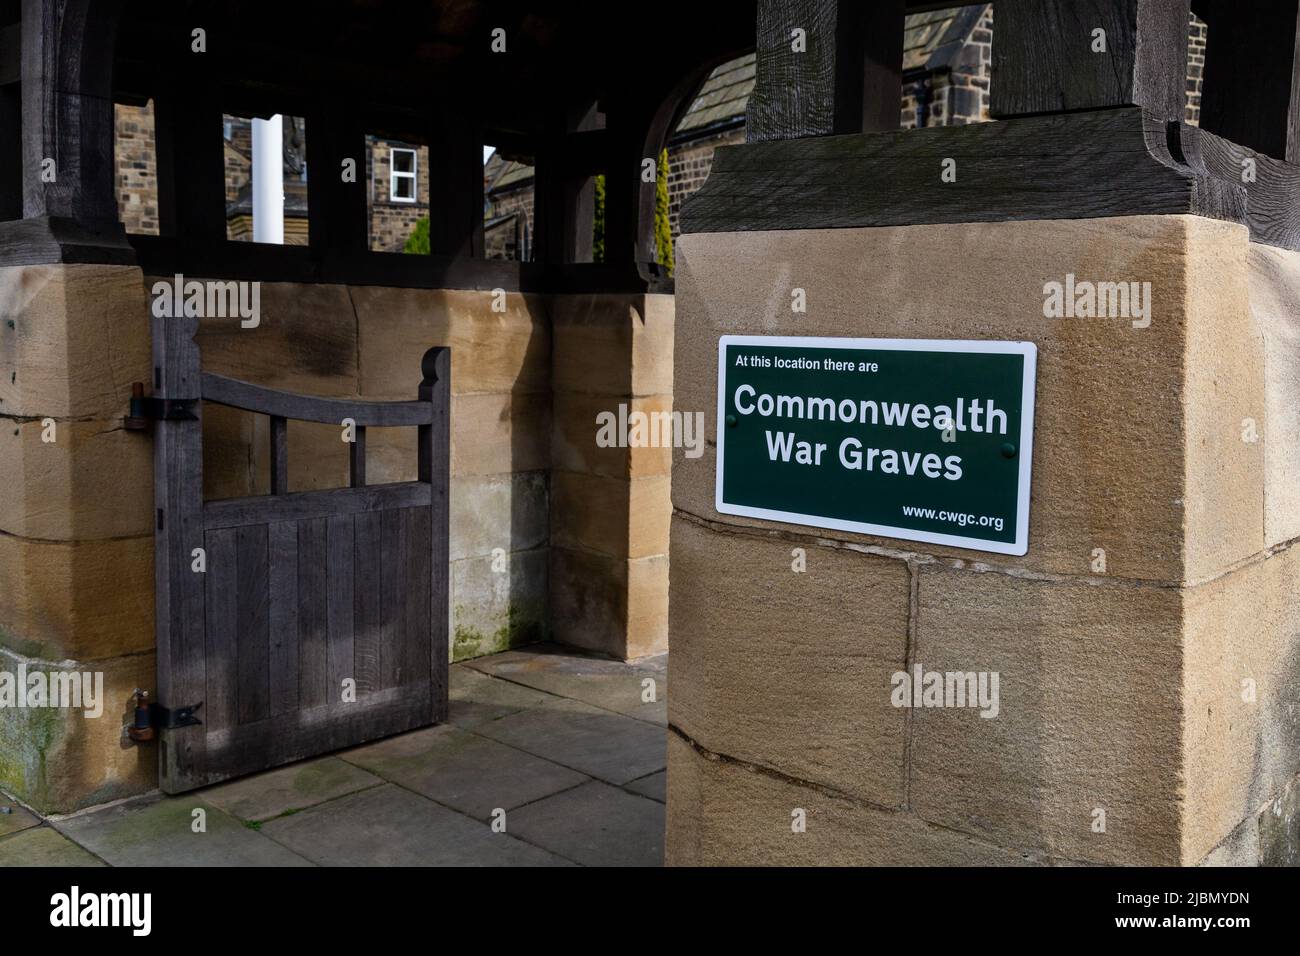 A green and white Commonwealth War Graves sign at the Lychgate of St John's Church of England, Baildon, Yorkshire. War Graves are located here. Stock Photo